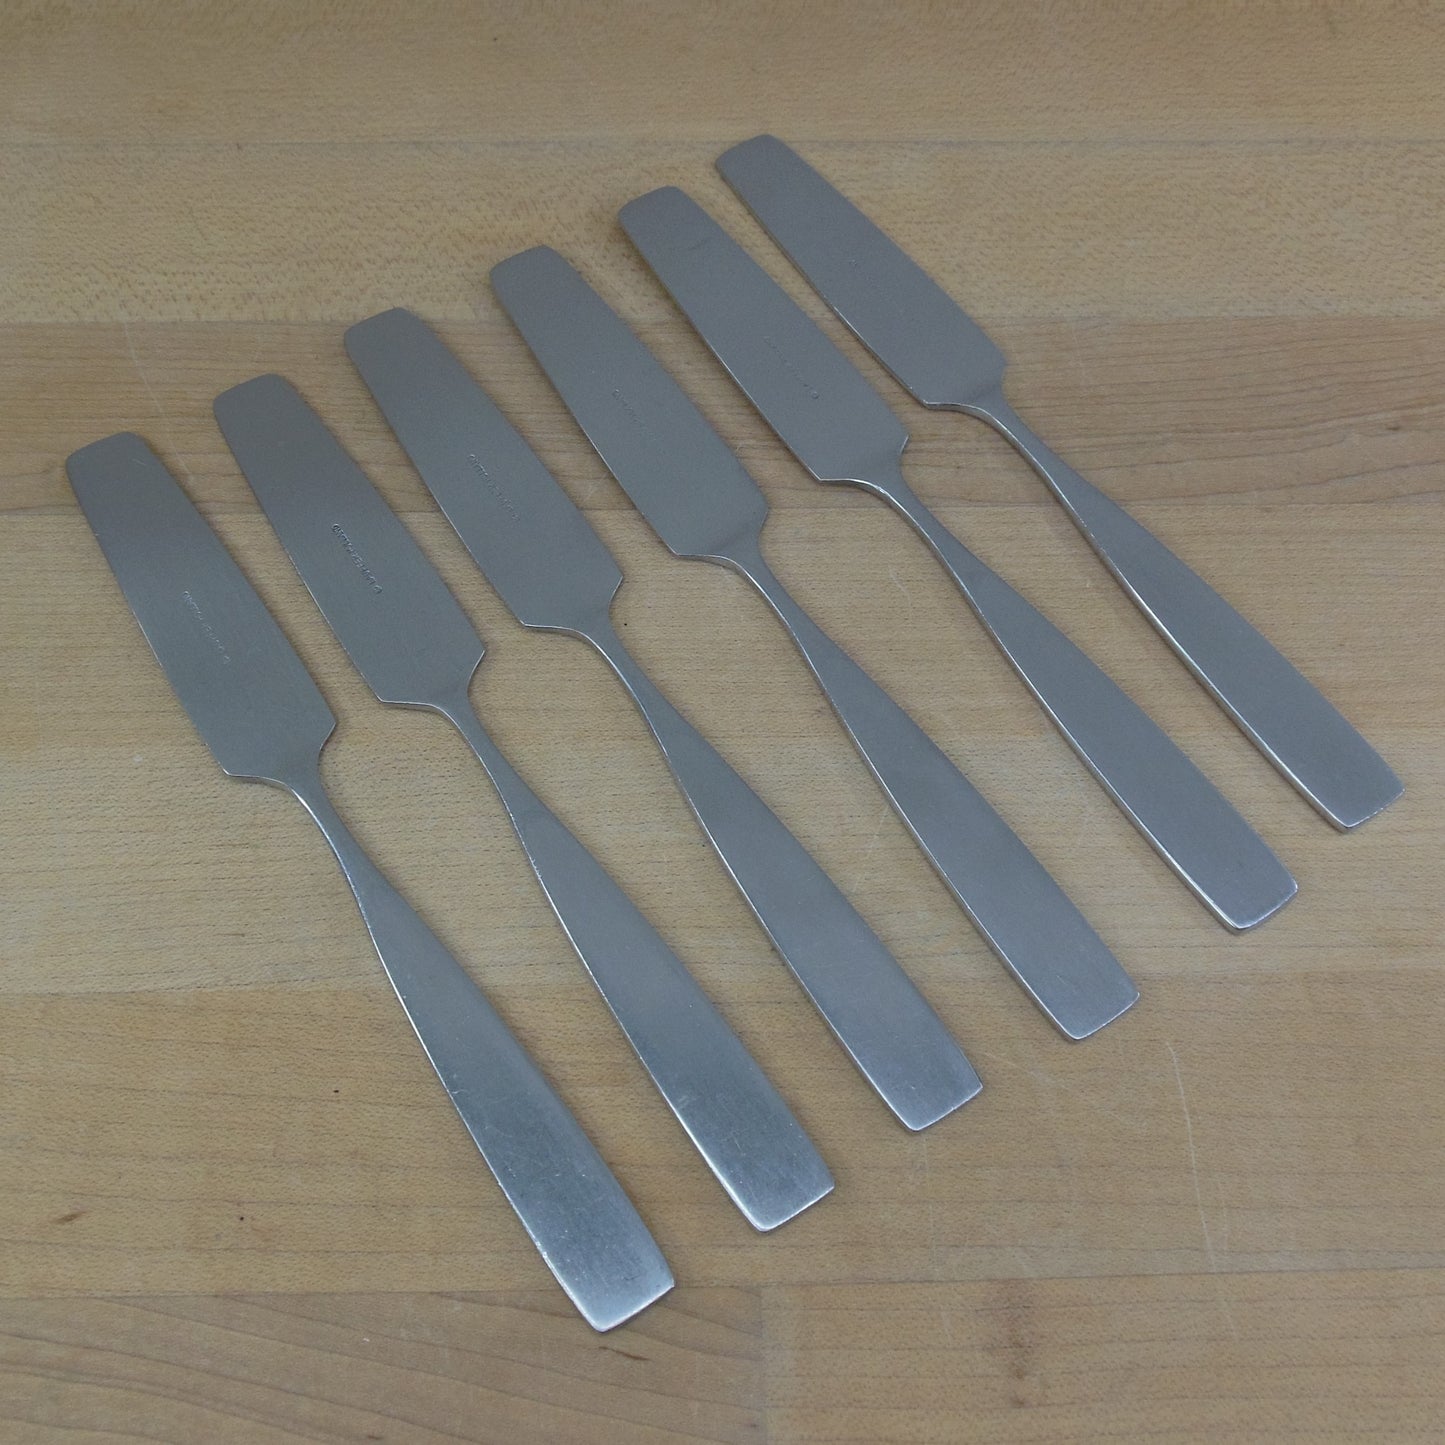 Towle Lauffer Bedford Holland Stainless Flatware - 6 Butter Spreader Knives Vintage